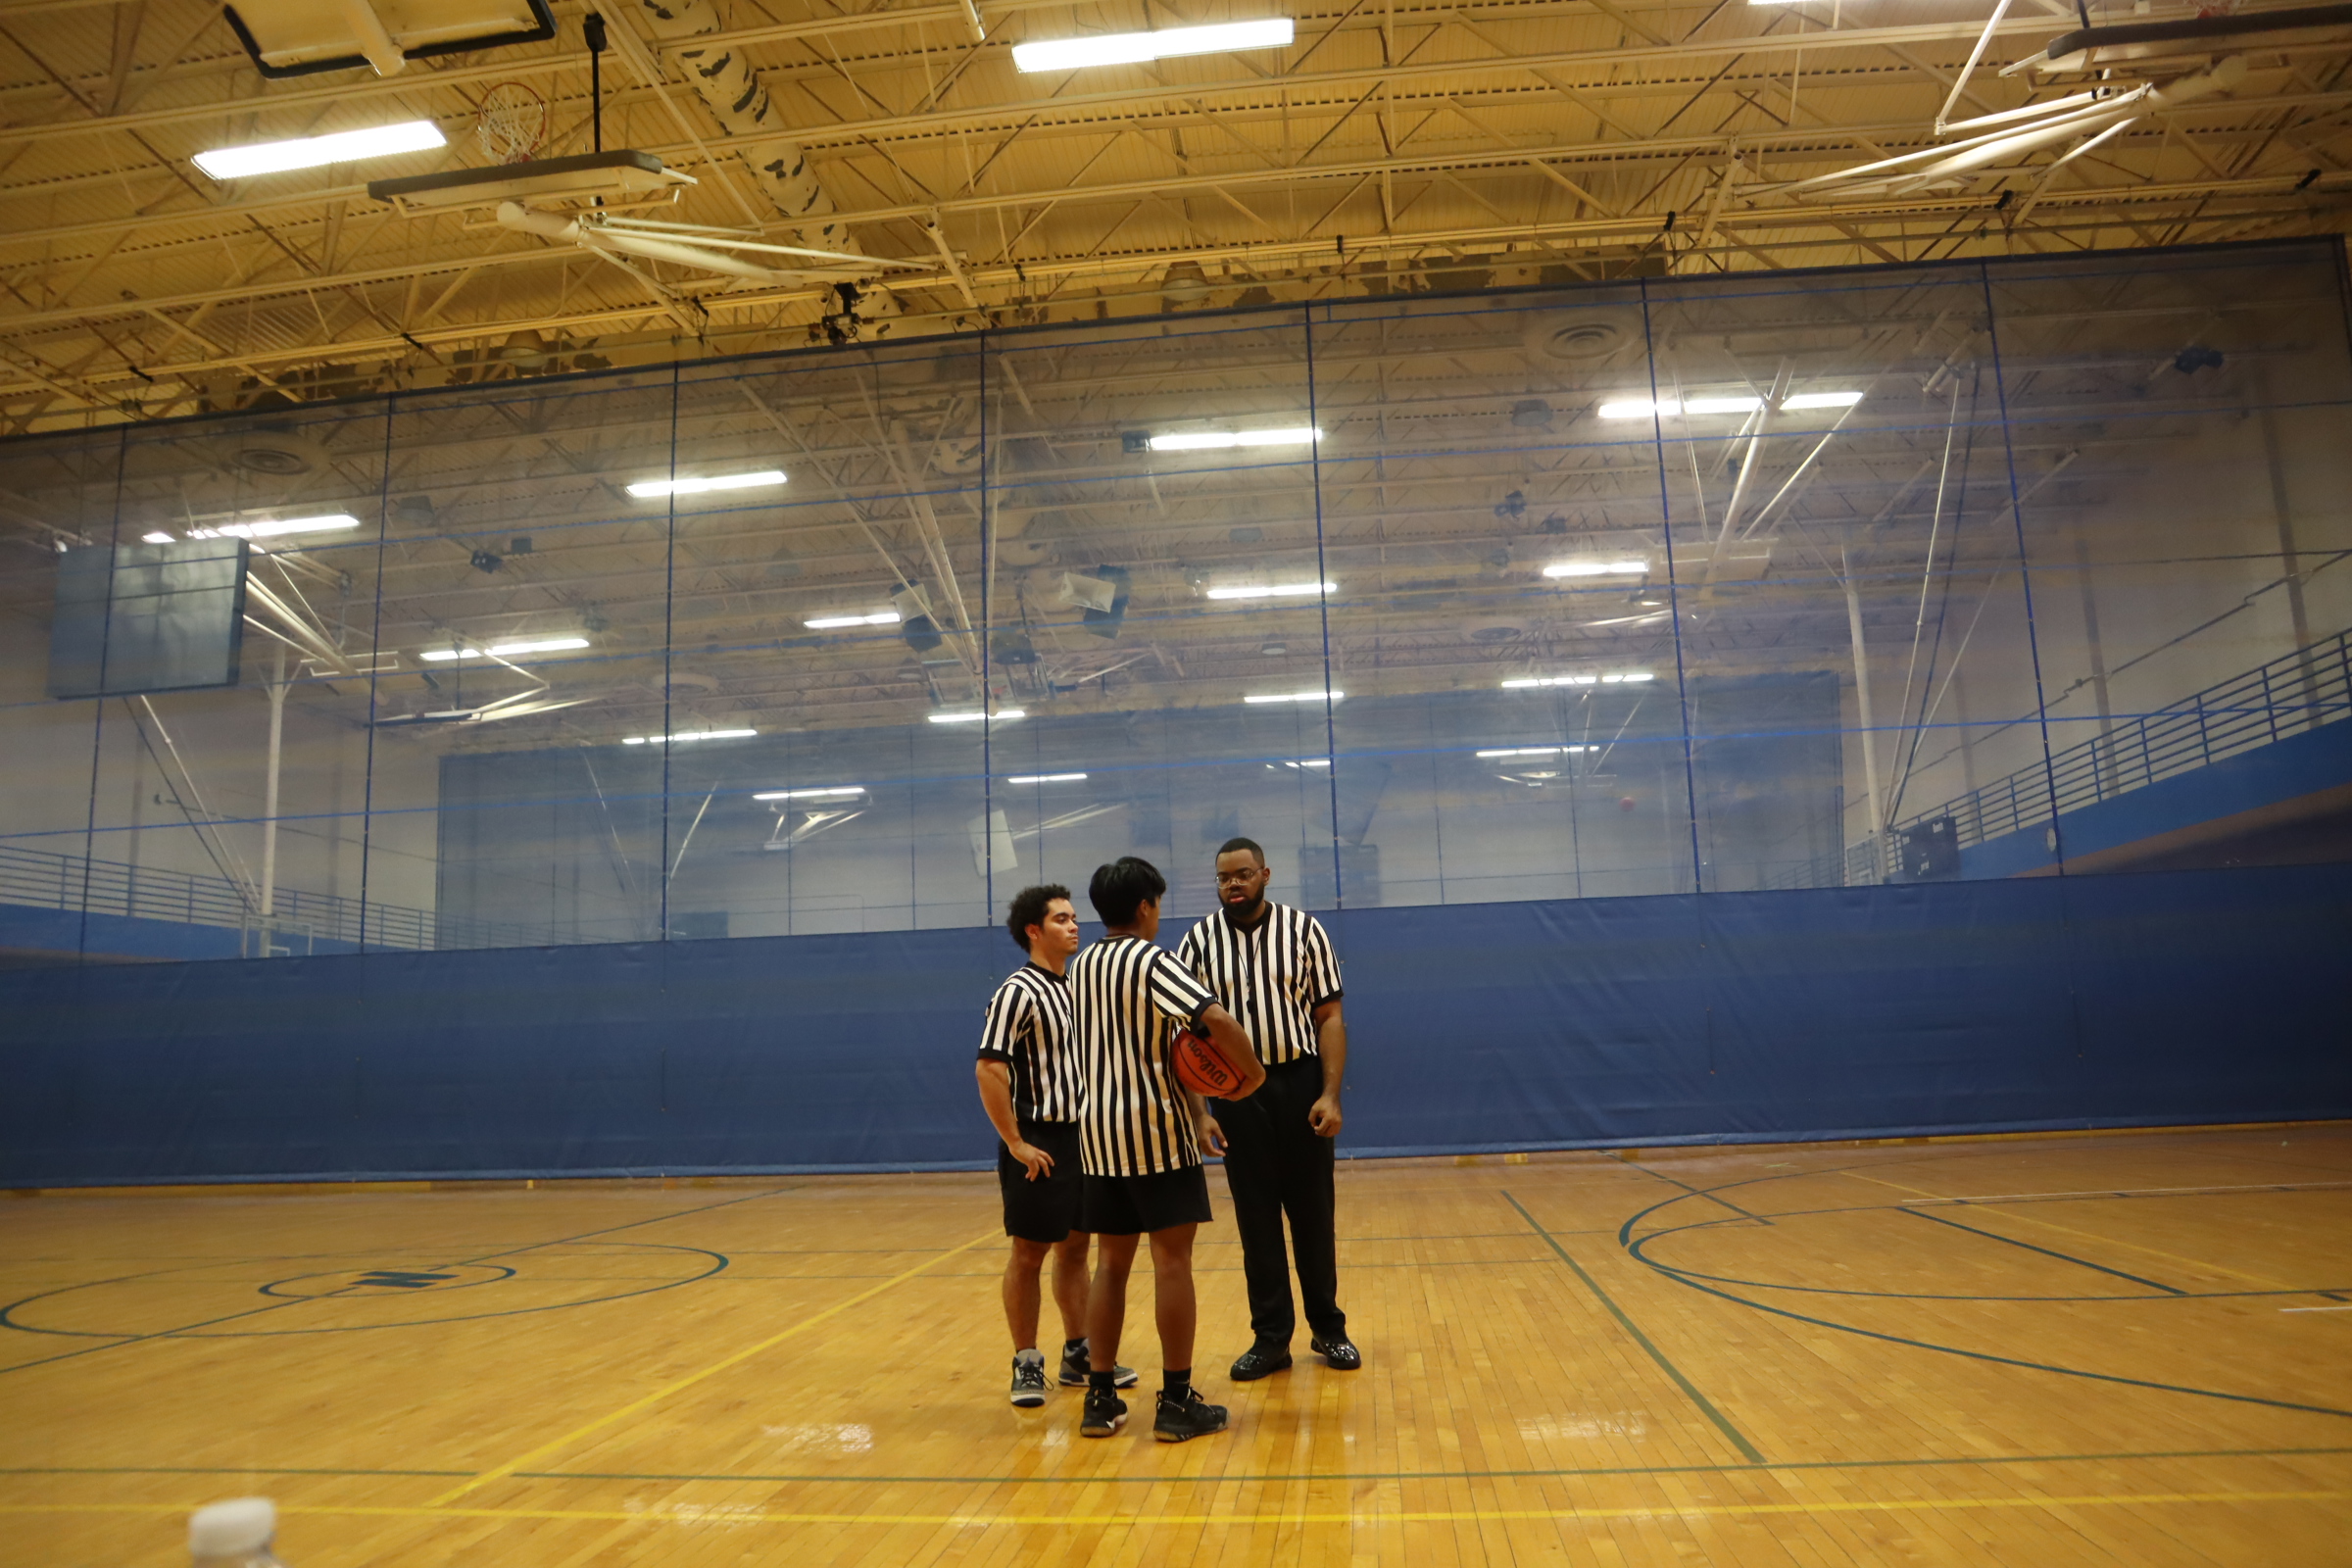 Student referees discussing a call